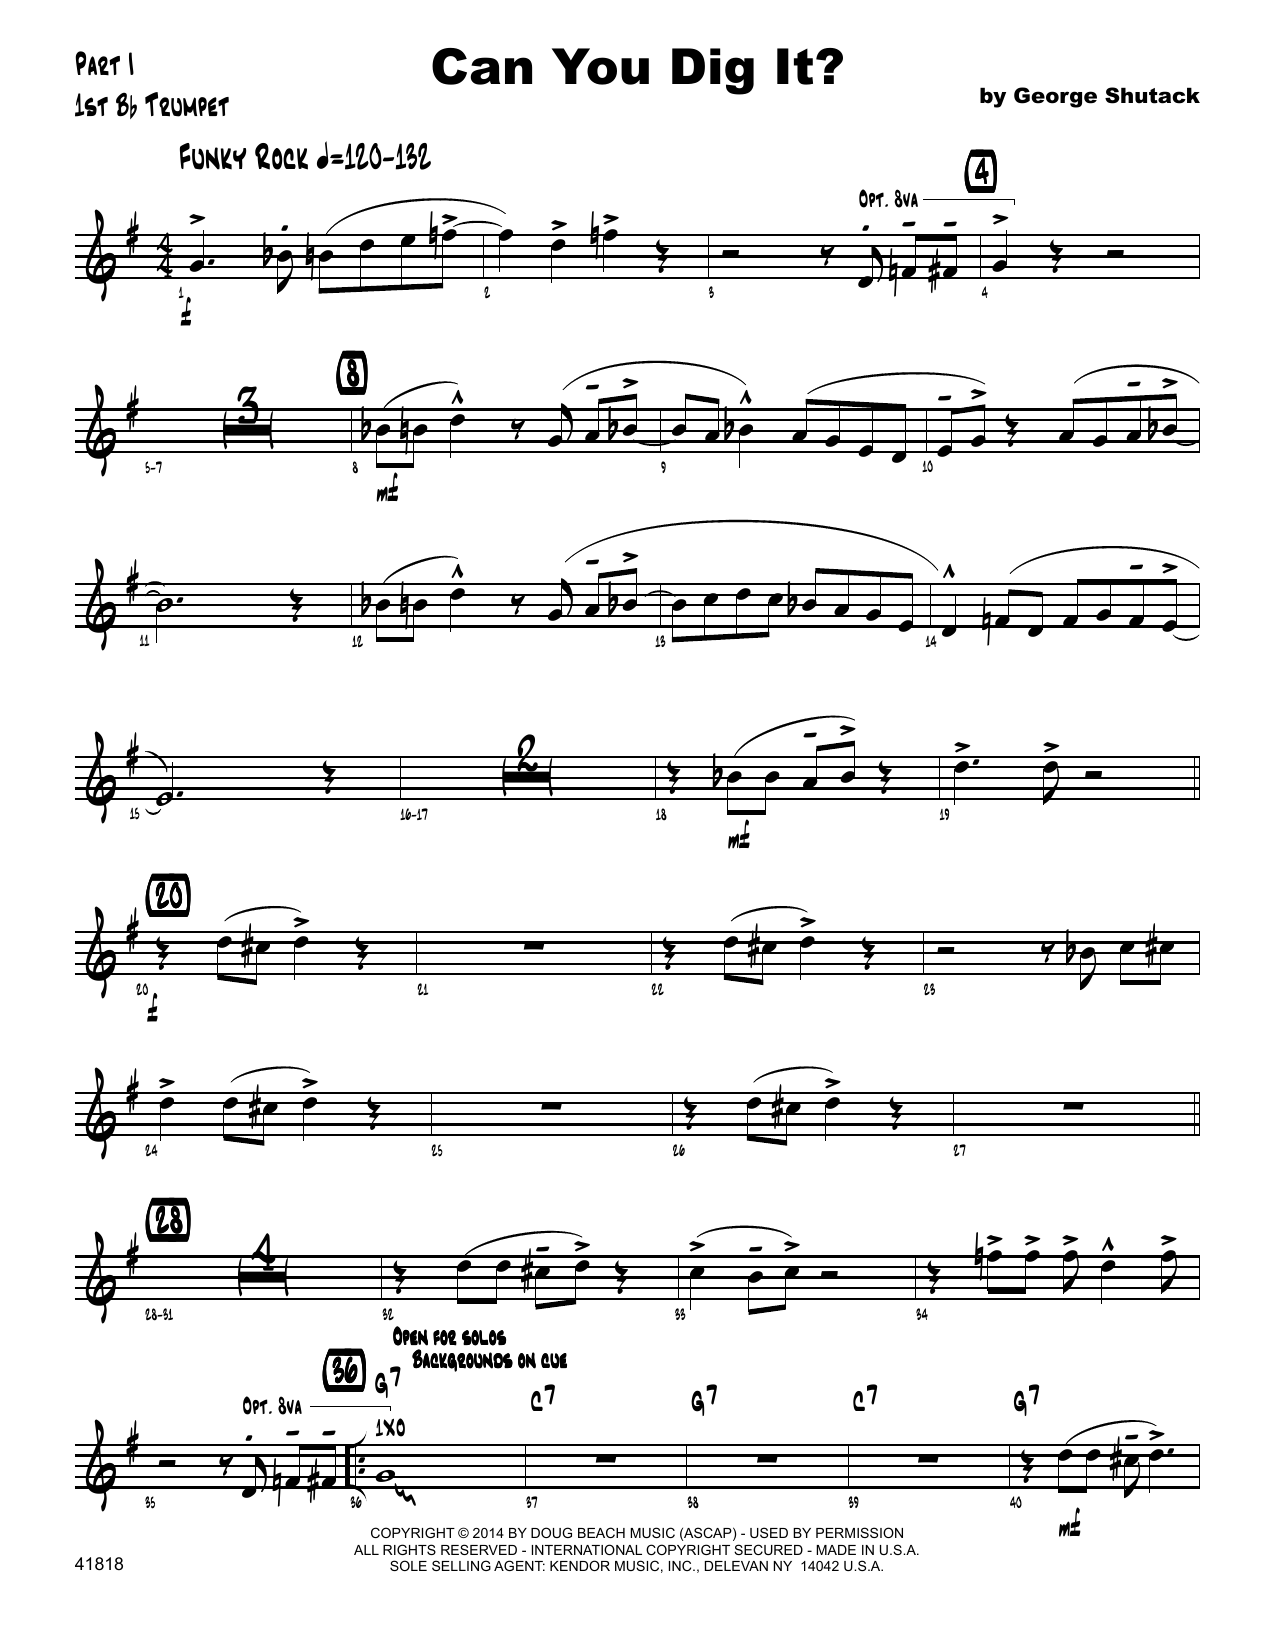 Download George Shutack Can You Dig It? - 1st Bb Trumpet Sheet Music